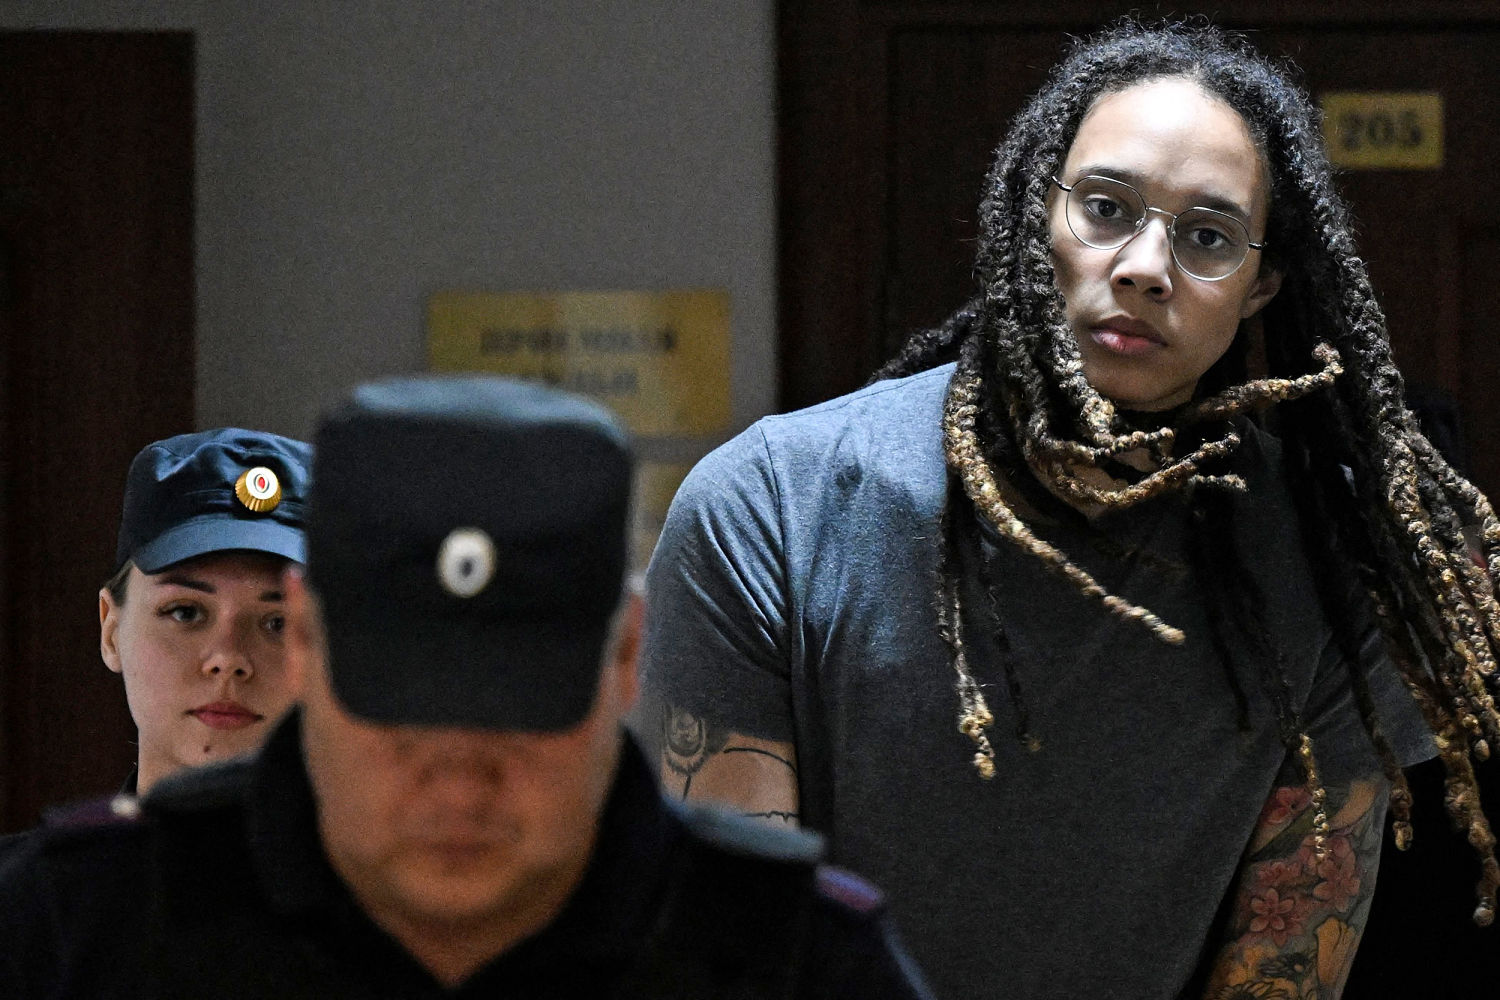 WNBA star Brittney Griner says she wanted to take her life during first few weeks in Russian jail